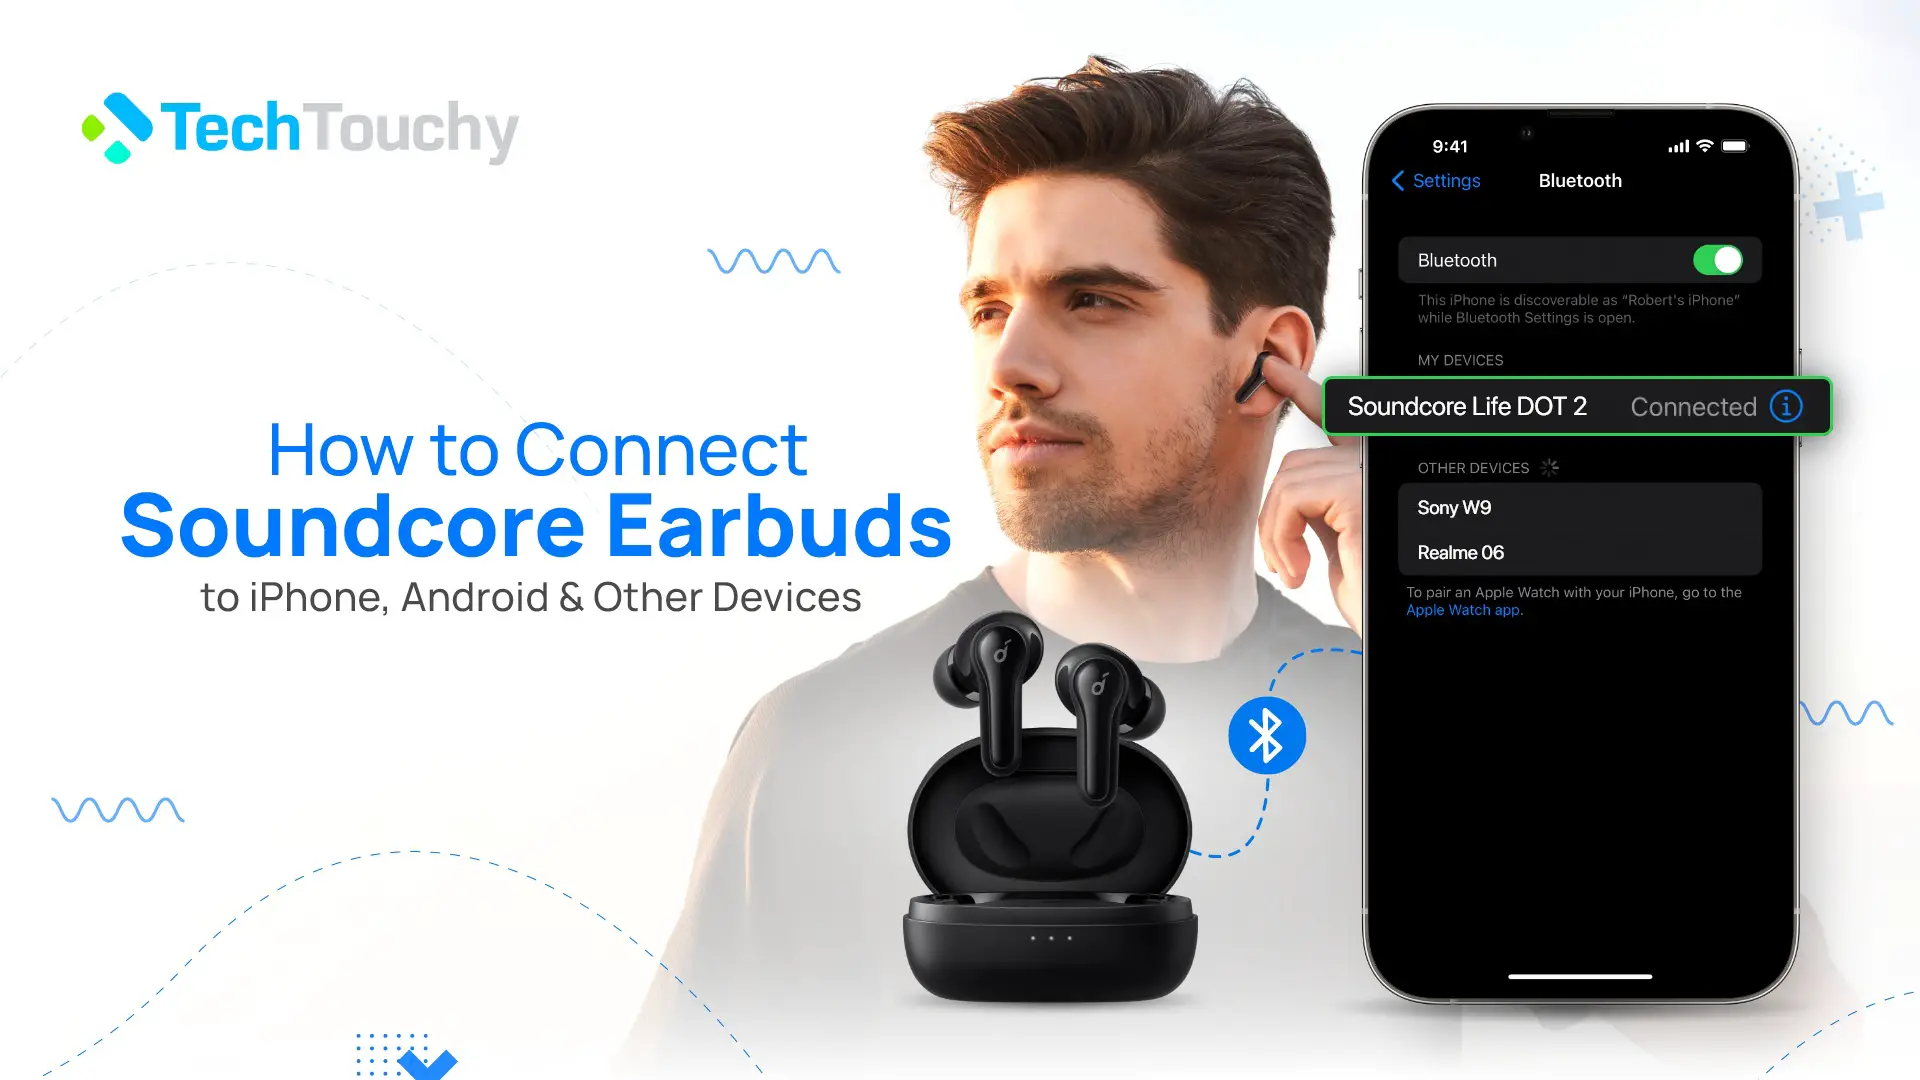 How to Connect Soundcore Earbuds to iPhone, Android & Other Devices